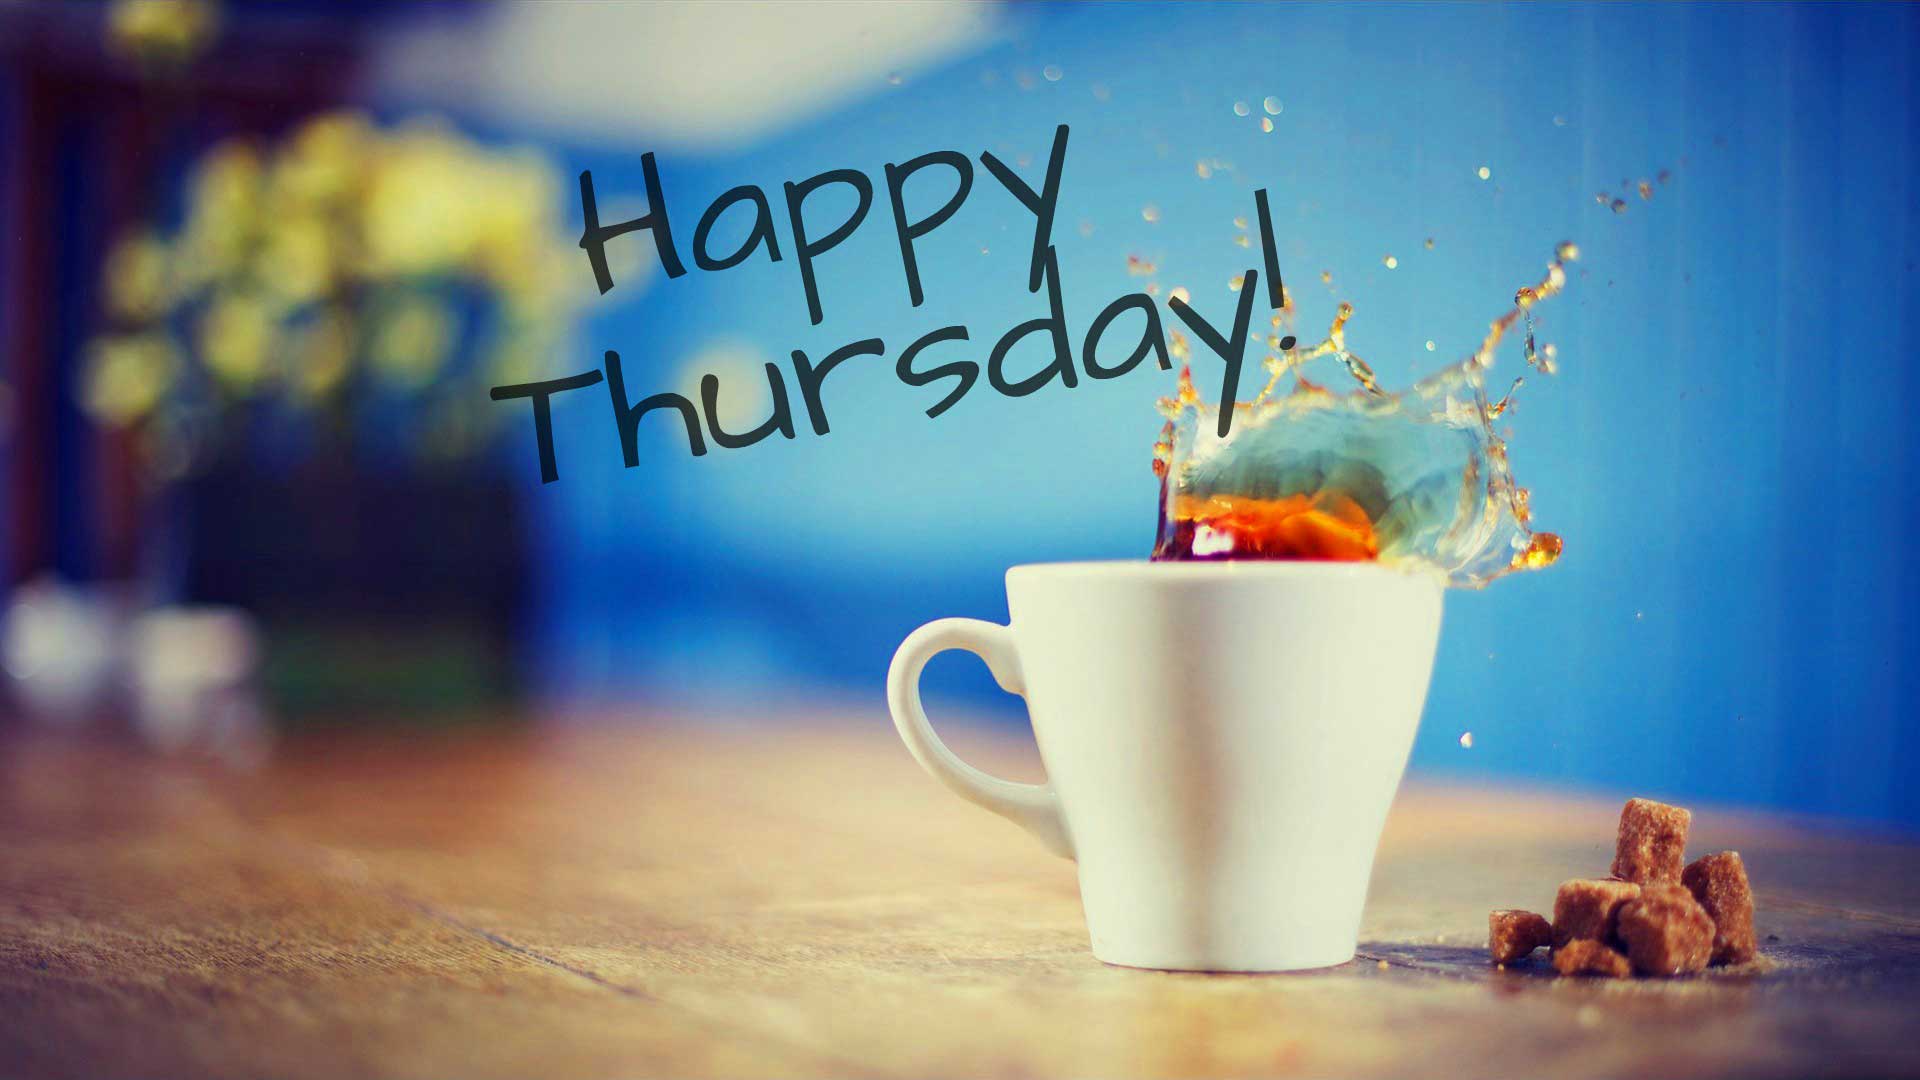 Happy Thursday Image Hd , HD Wallpaper & Backgrounds